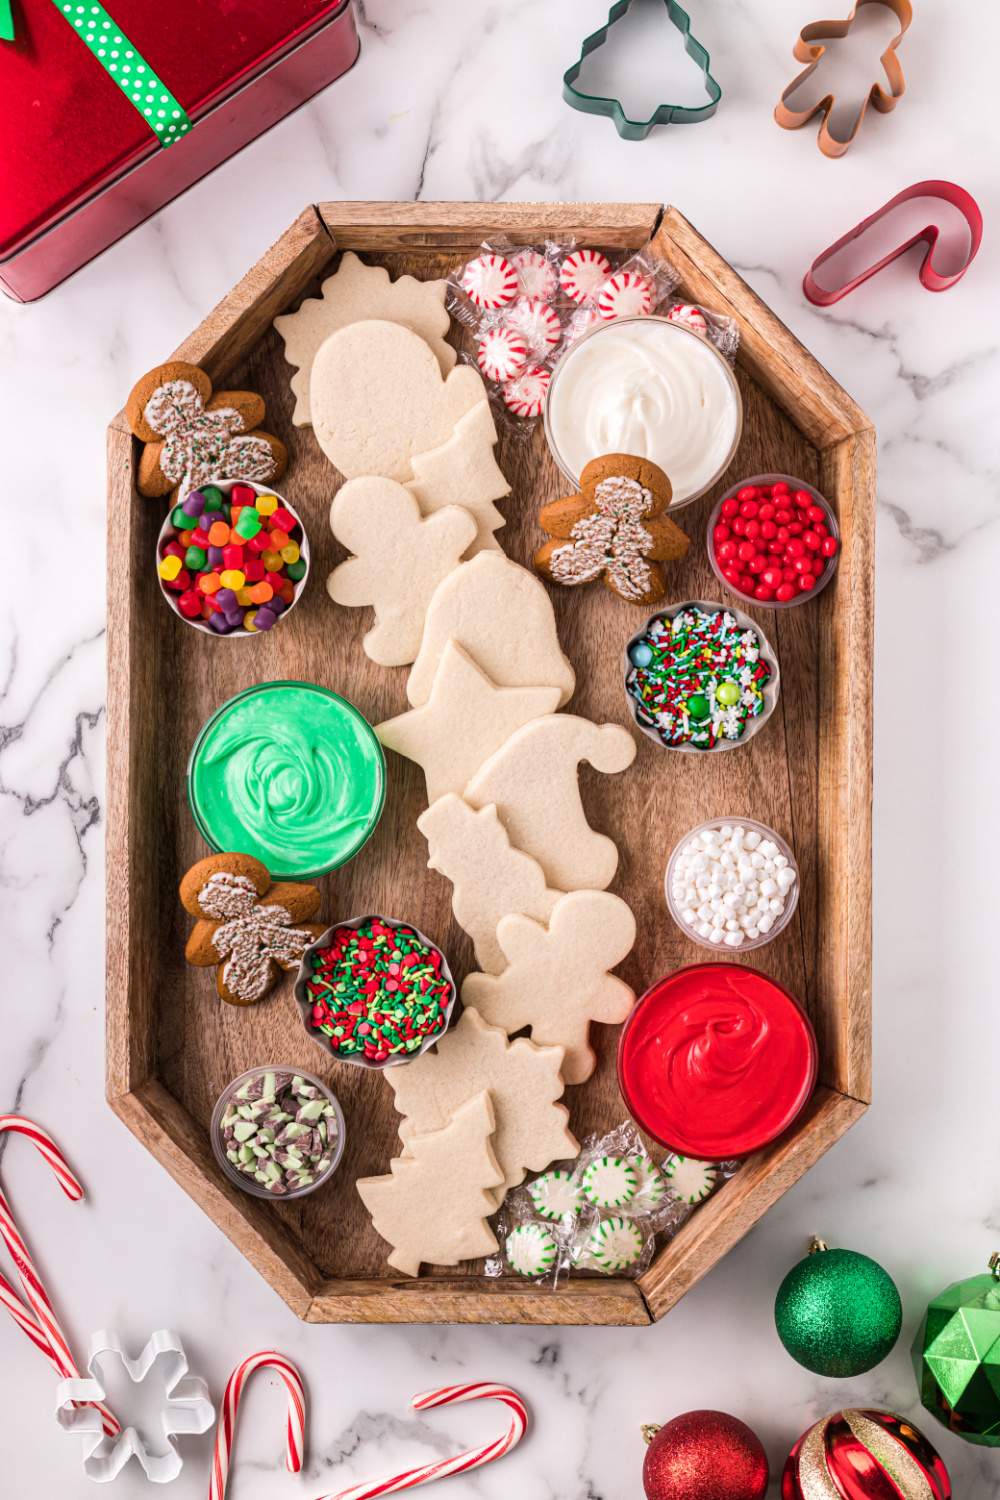 How Long Do Sugar Cookies Last: Decorated vs Undecorated